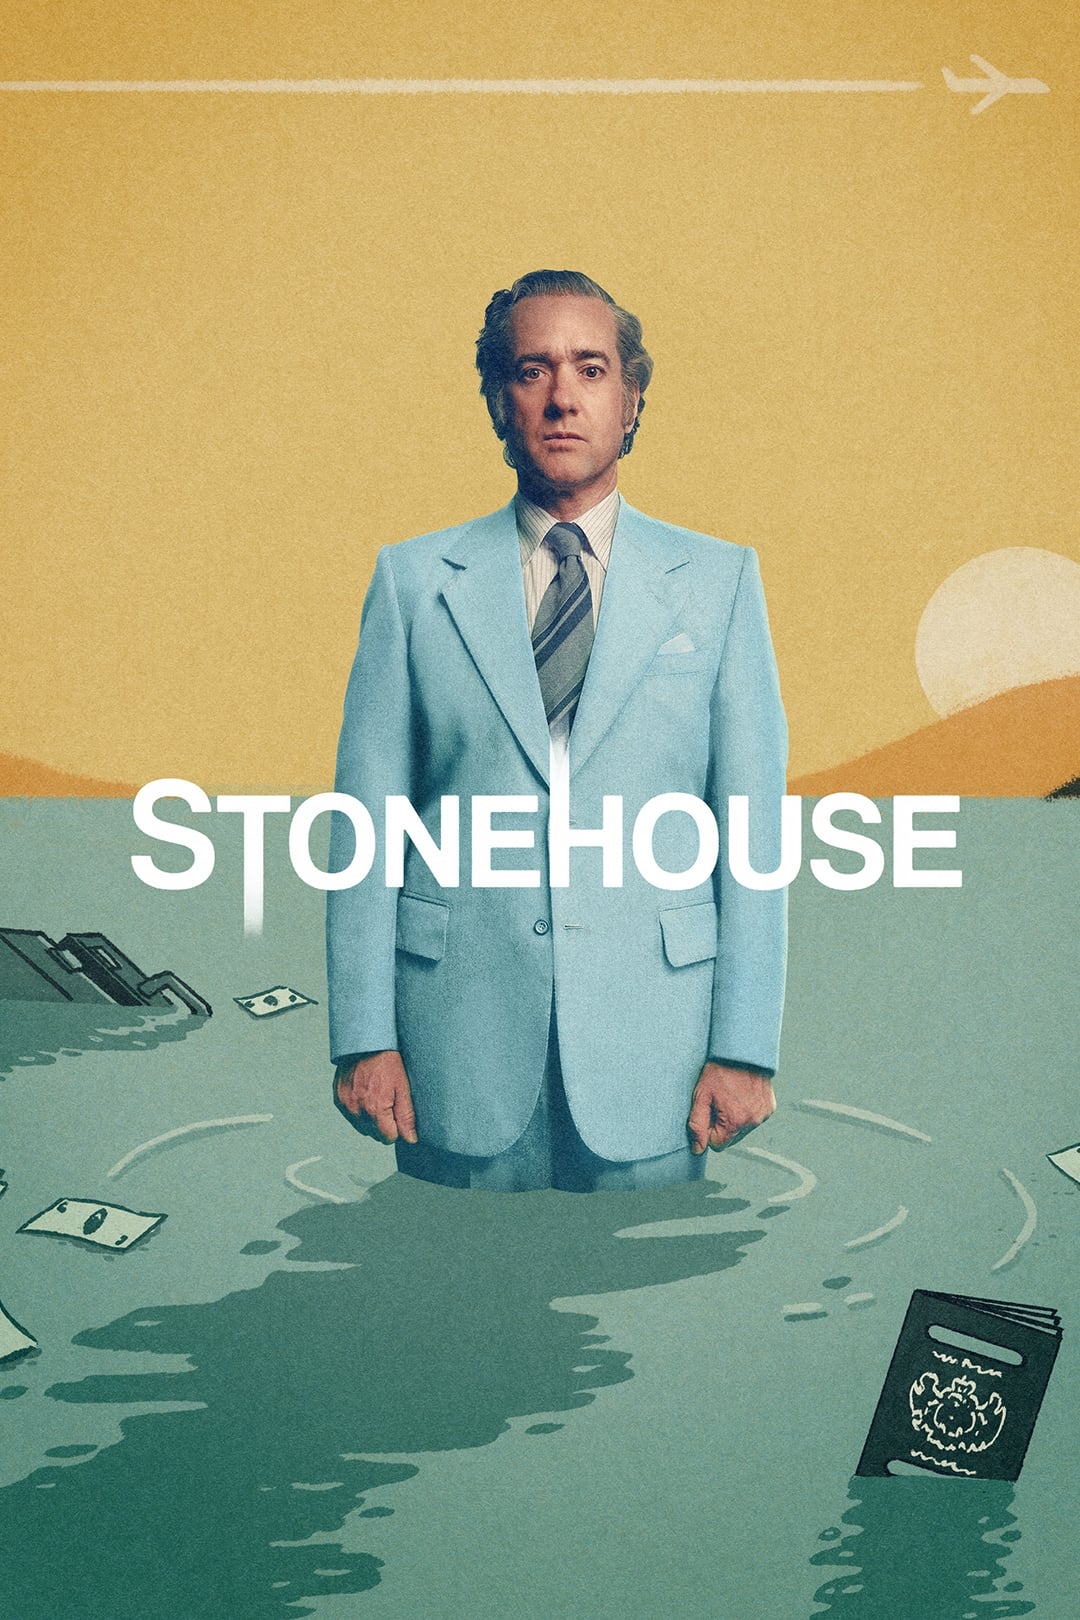 Stonehouse TV Shows About Politician